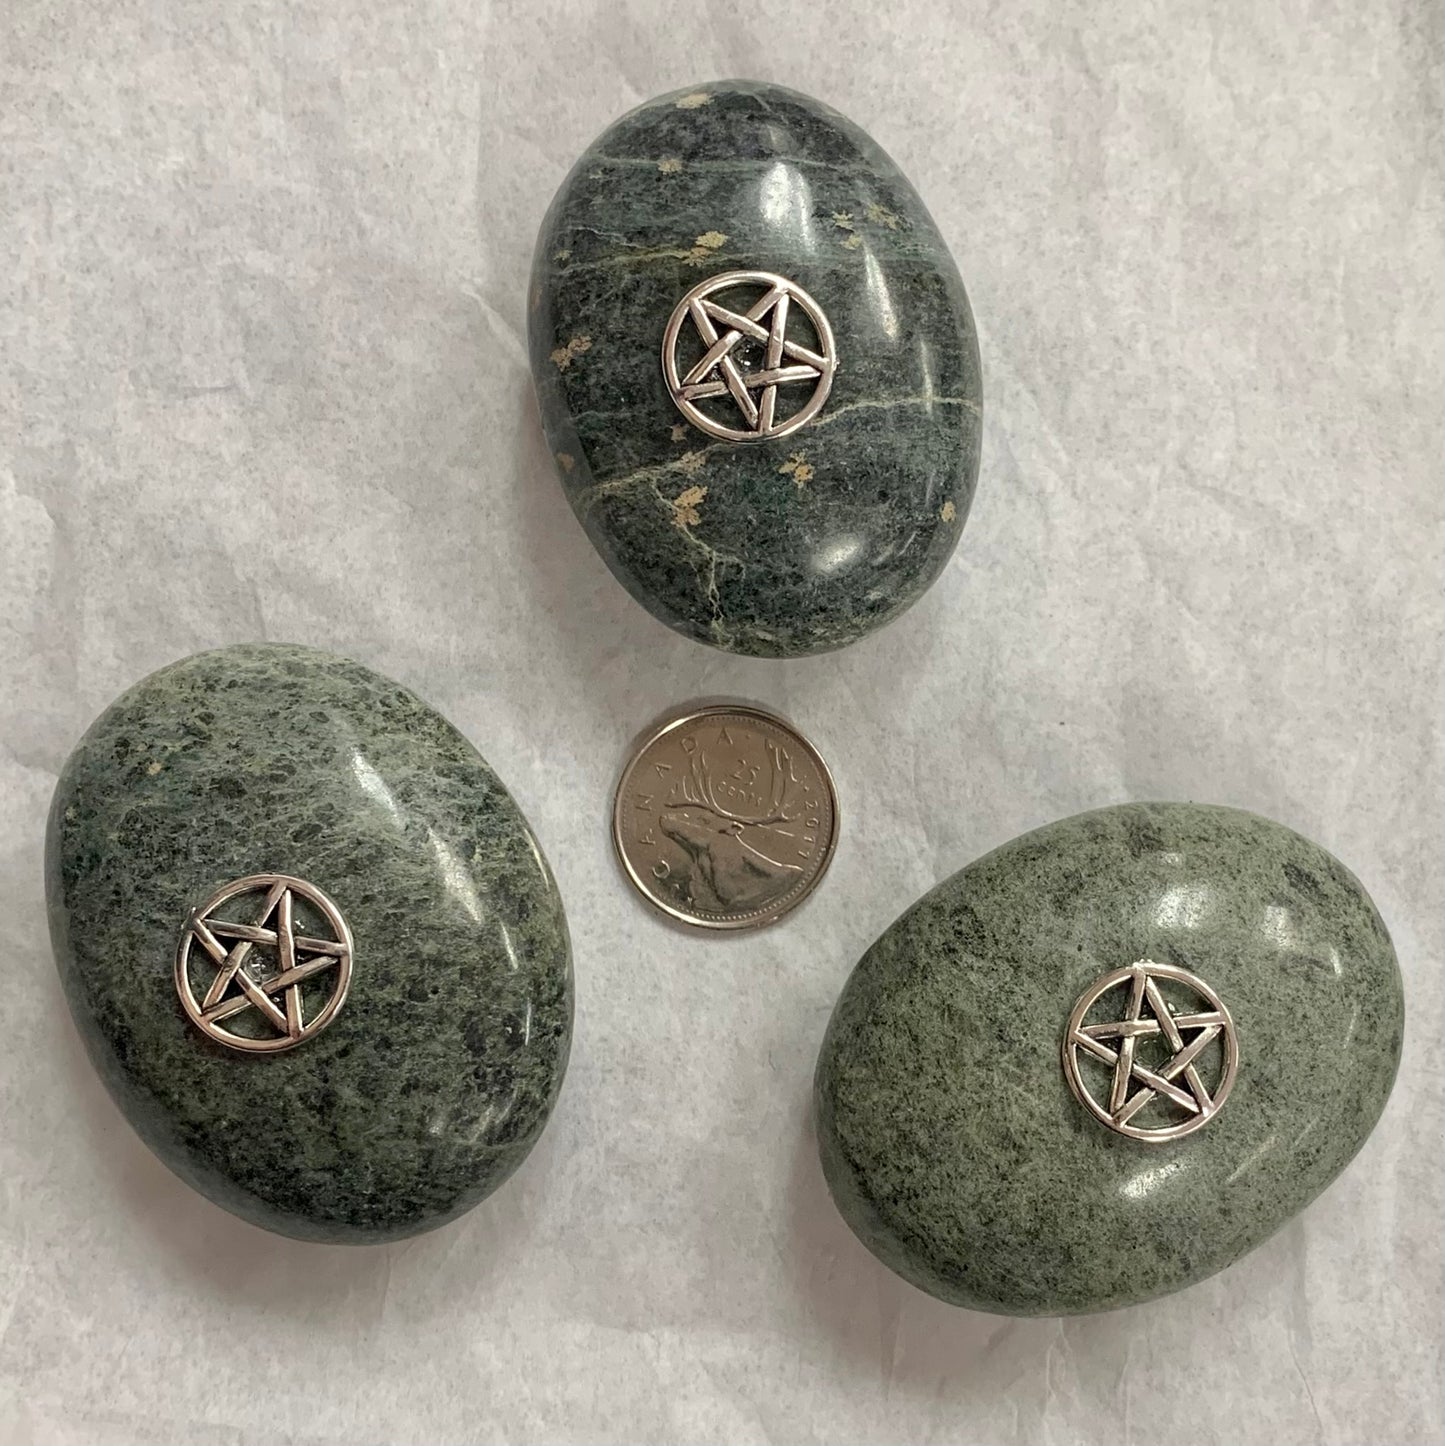 Serpentine Palm Stone with Pentacle